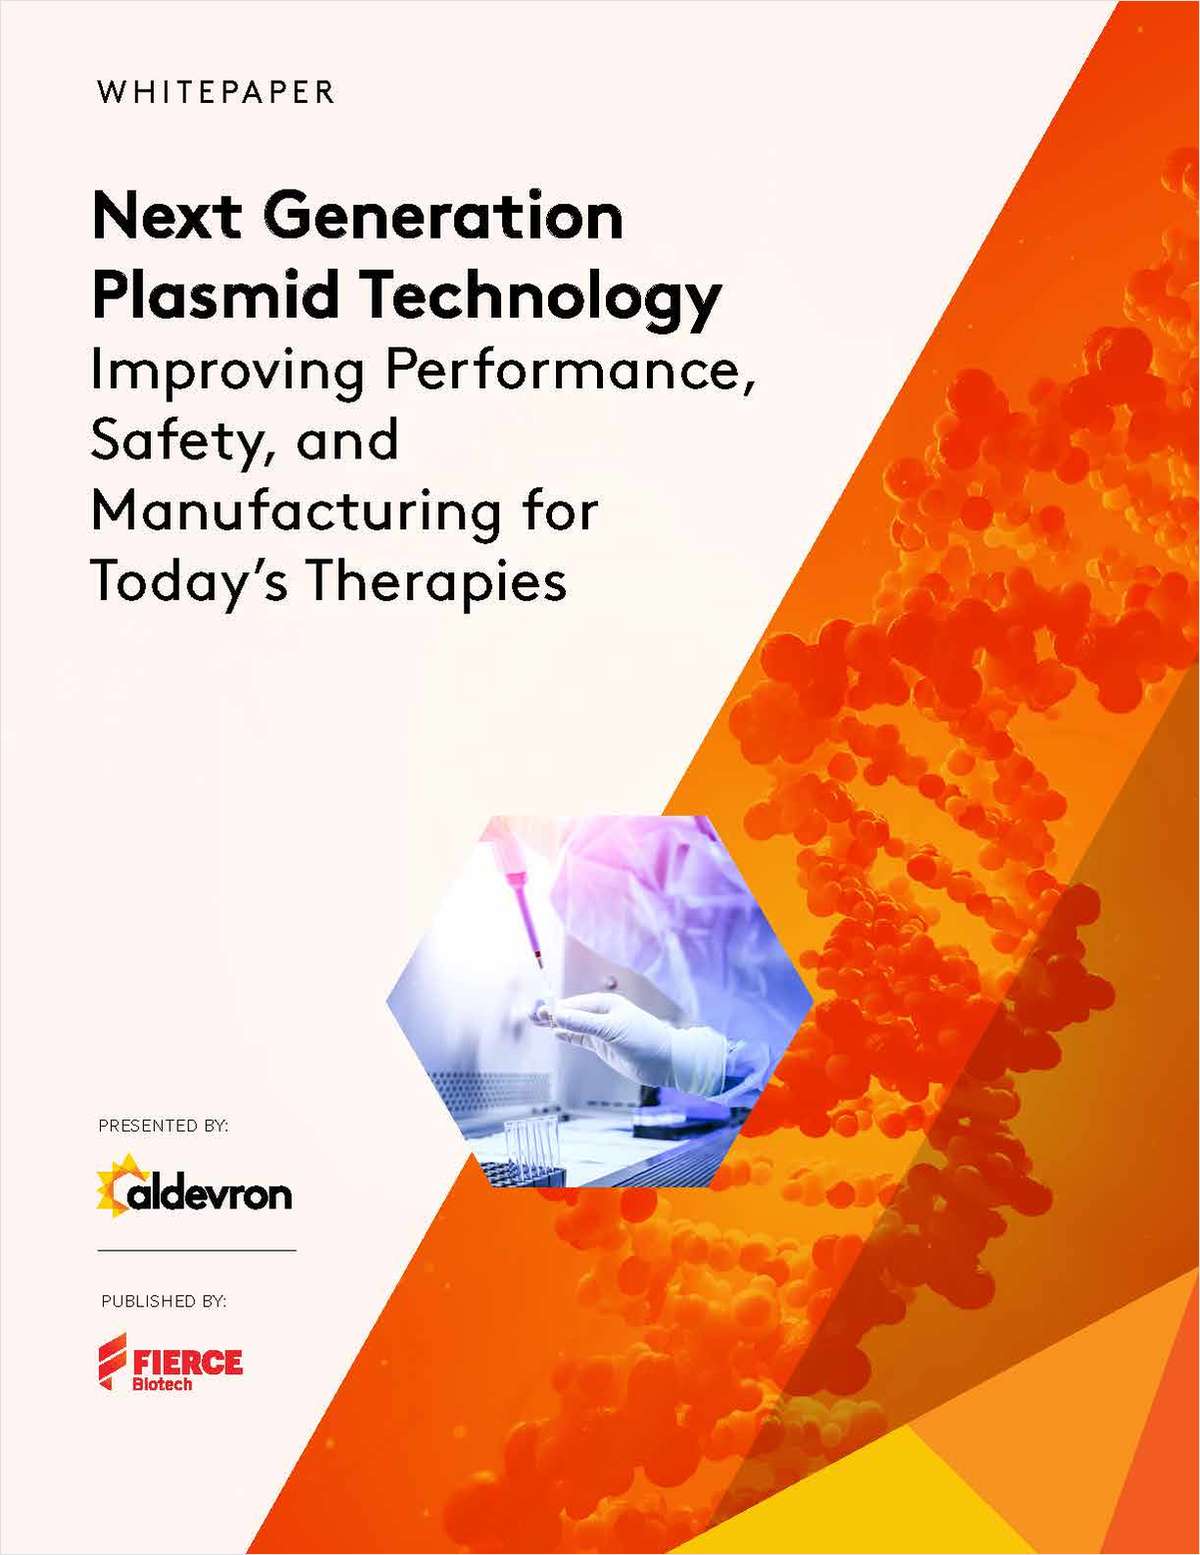 Improving Performance, Safety, and Manufacturing for Today's Therapies